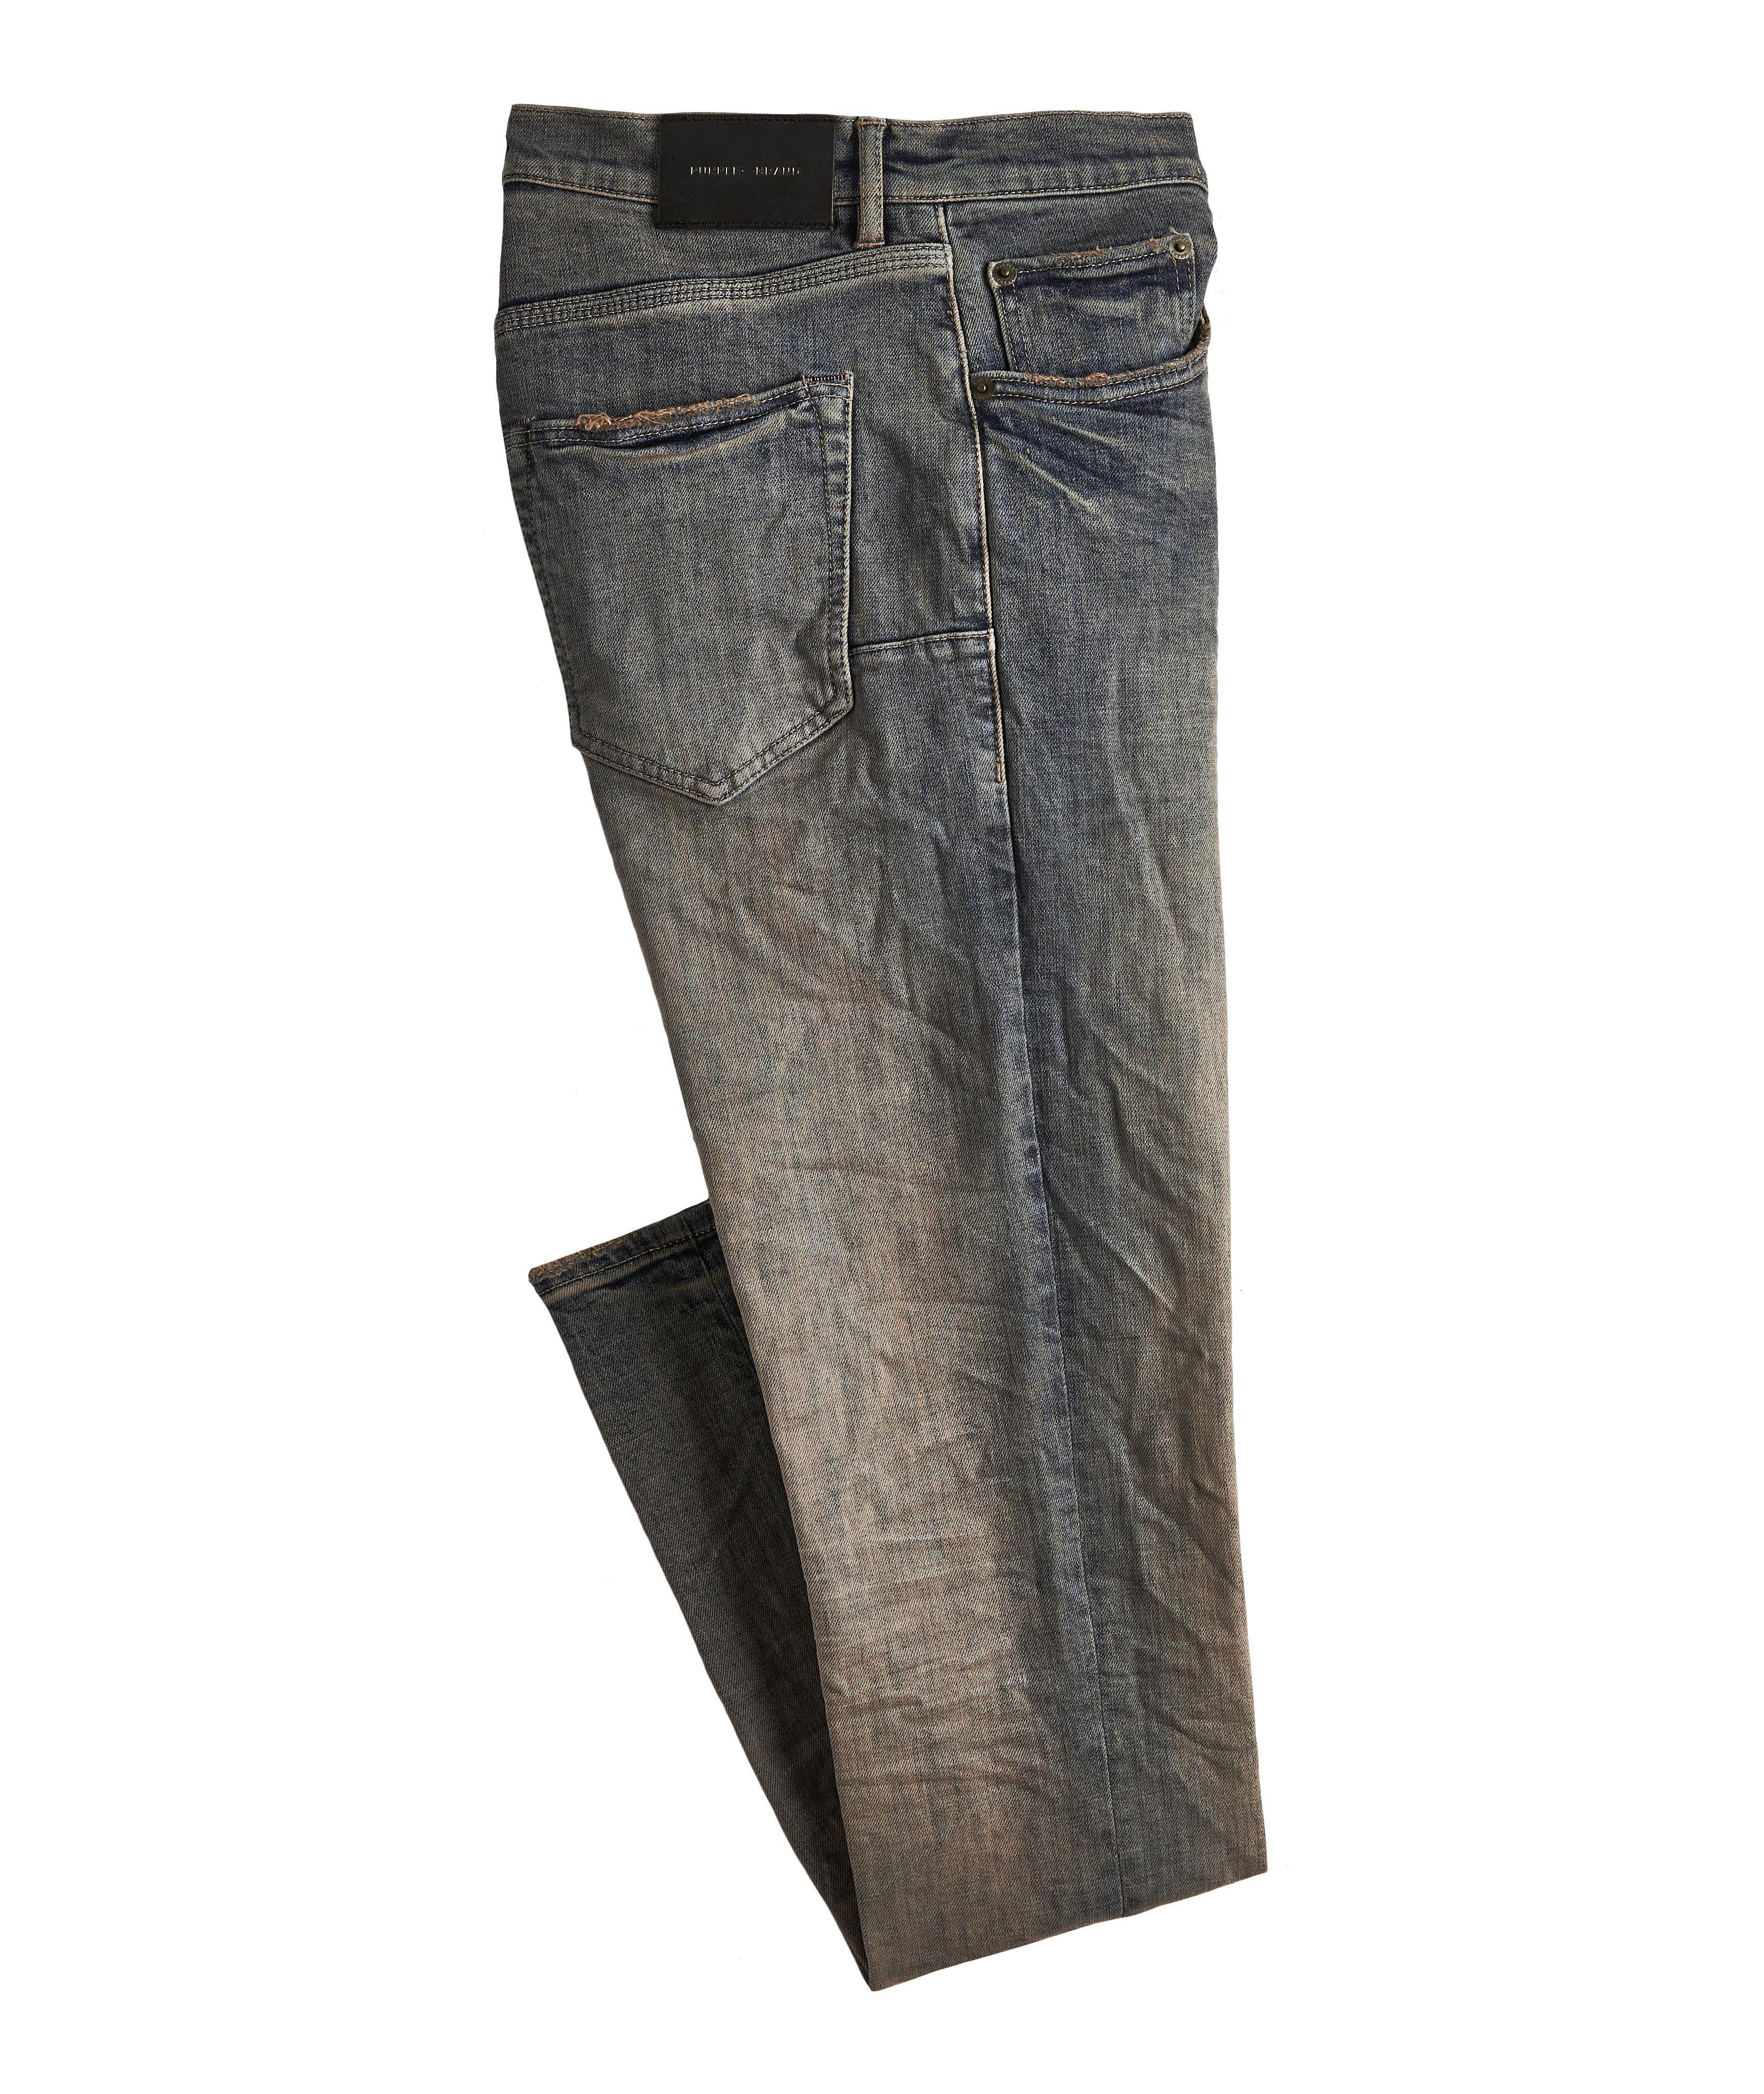 P001 Tinted Skinny Jeans image 0